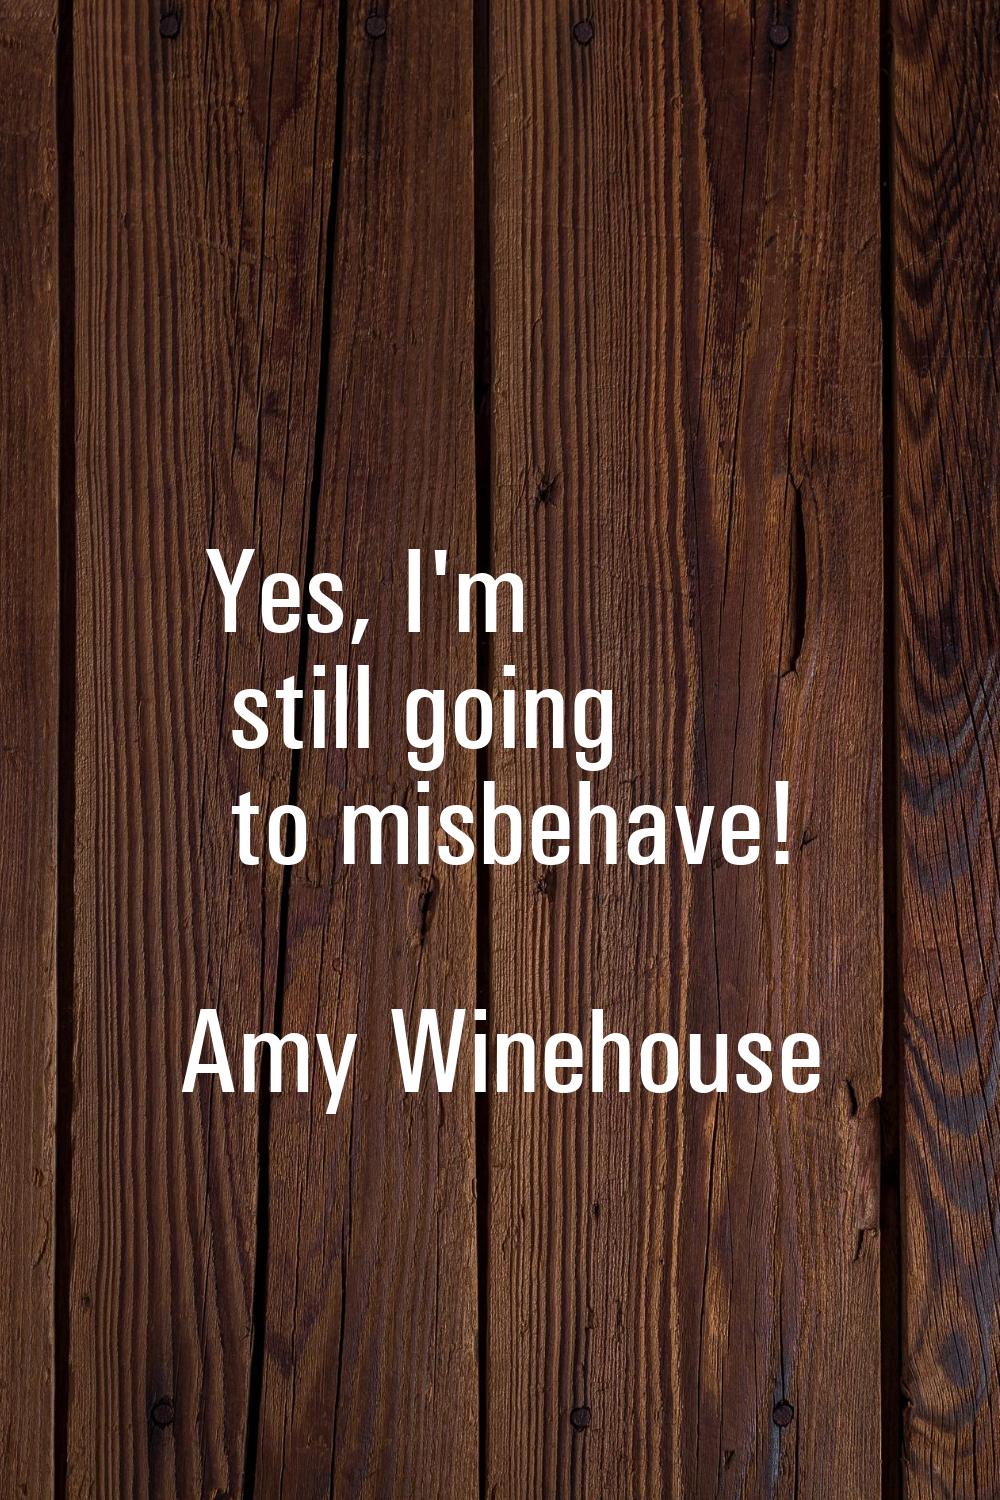 Yes, I'm still going to misbehave!